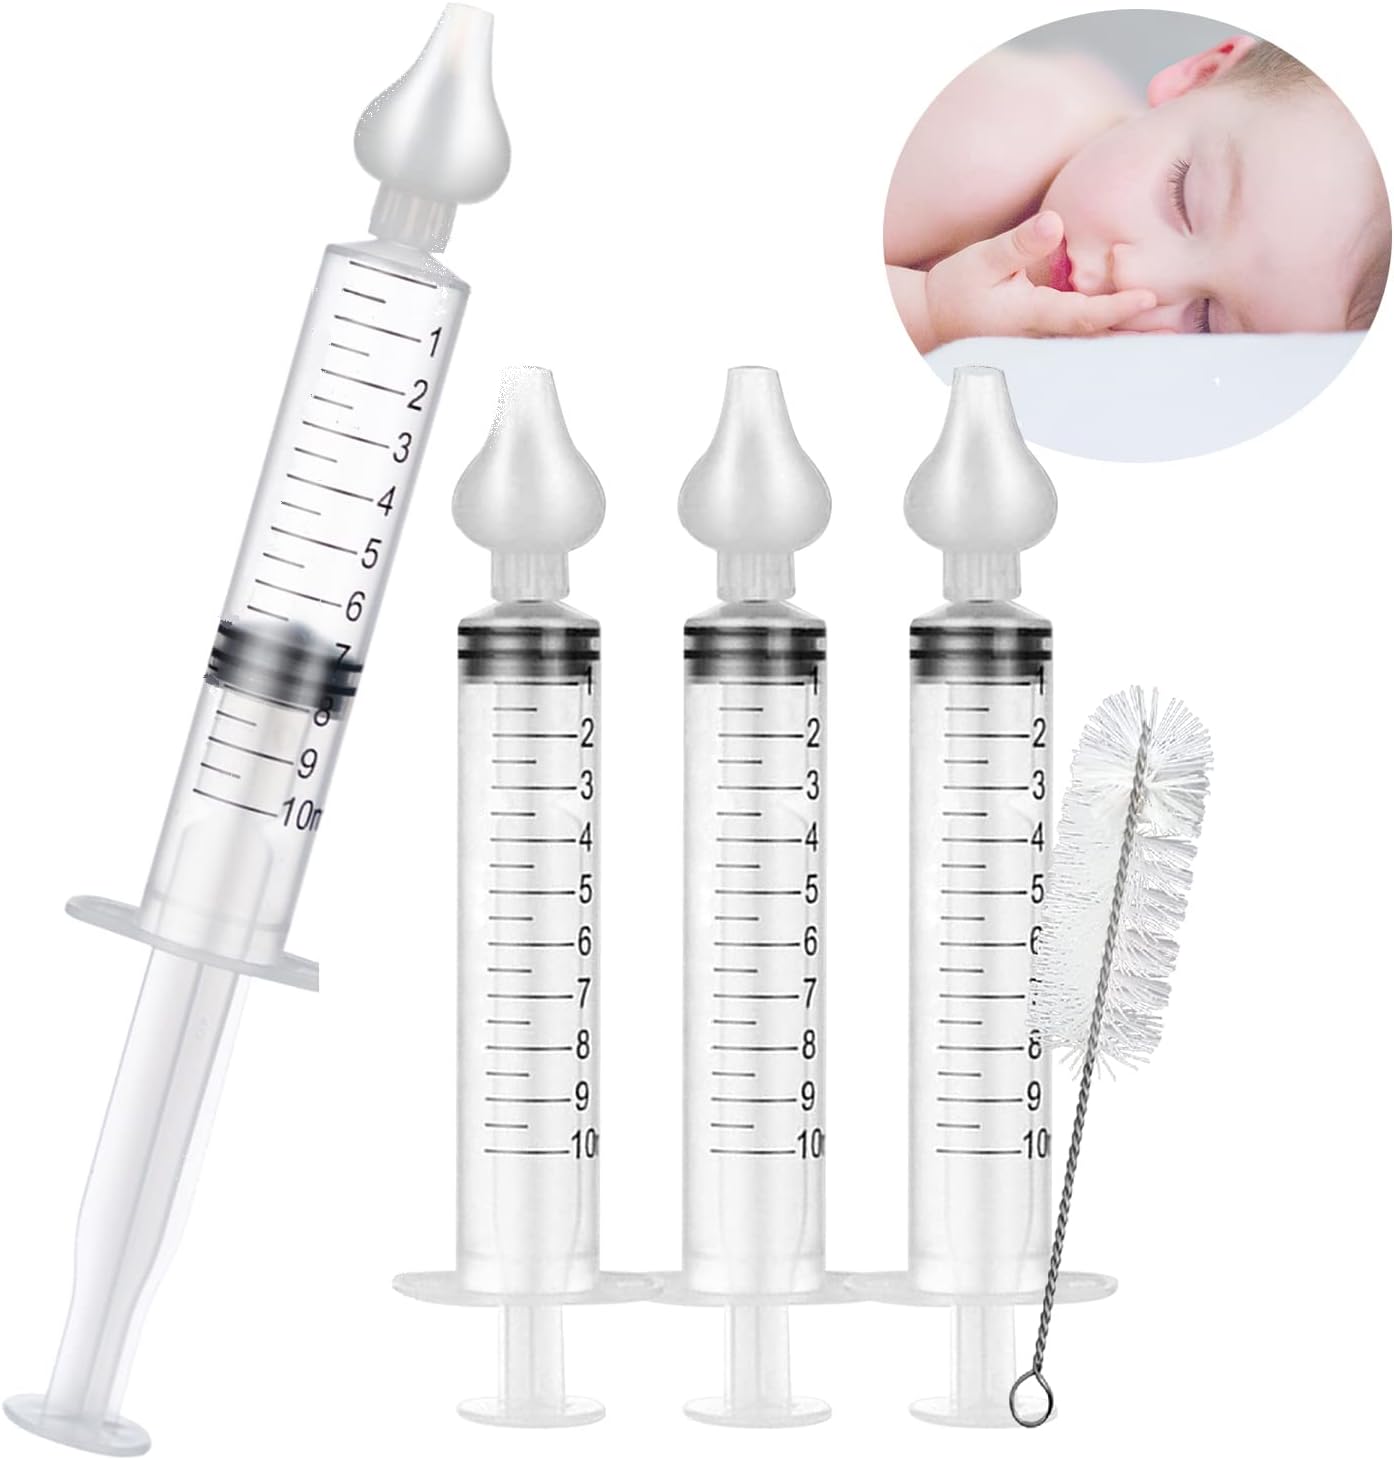 Wholesale OEM Baby Nose Syringe - Set of 4 baby fly syringes+1 manual baby fly cleaning brush provided - Soft baby fly tip for painless nose cleaning